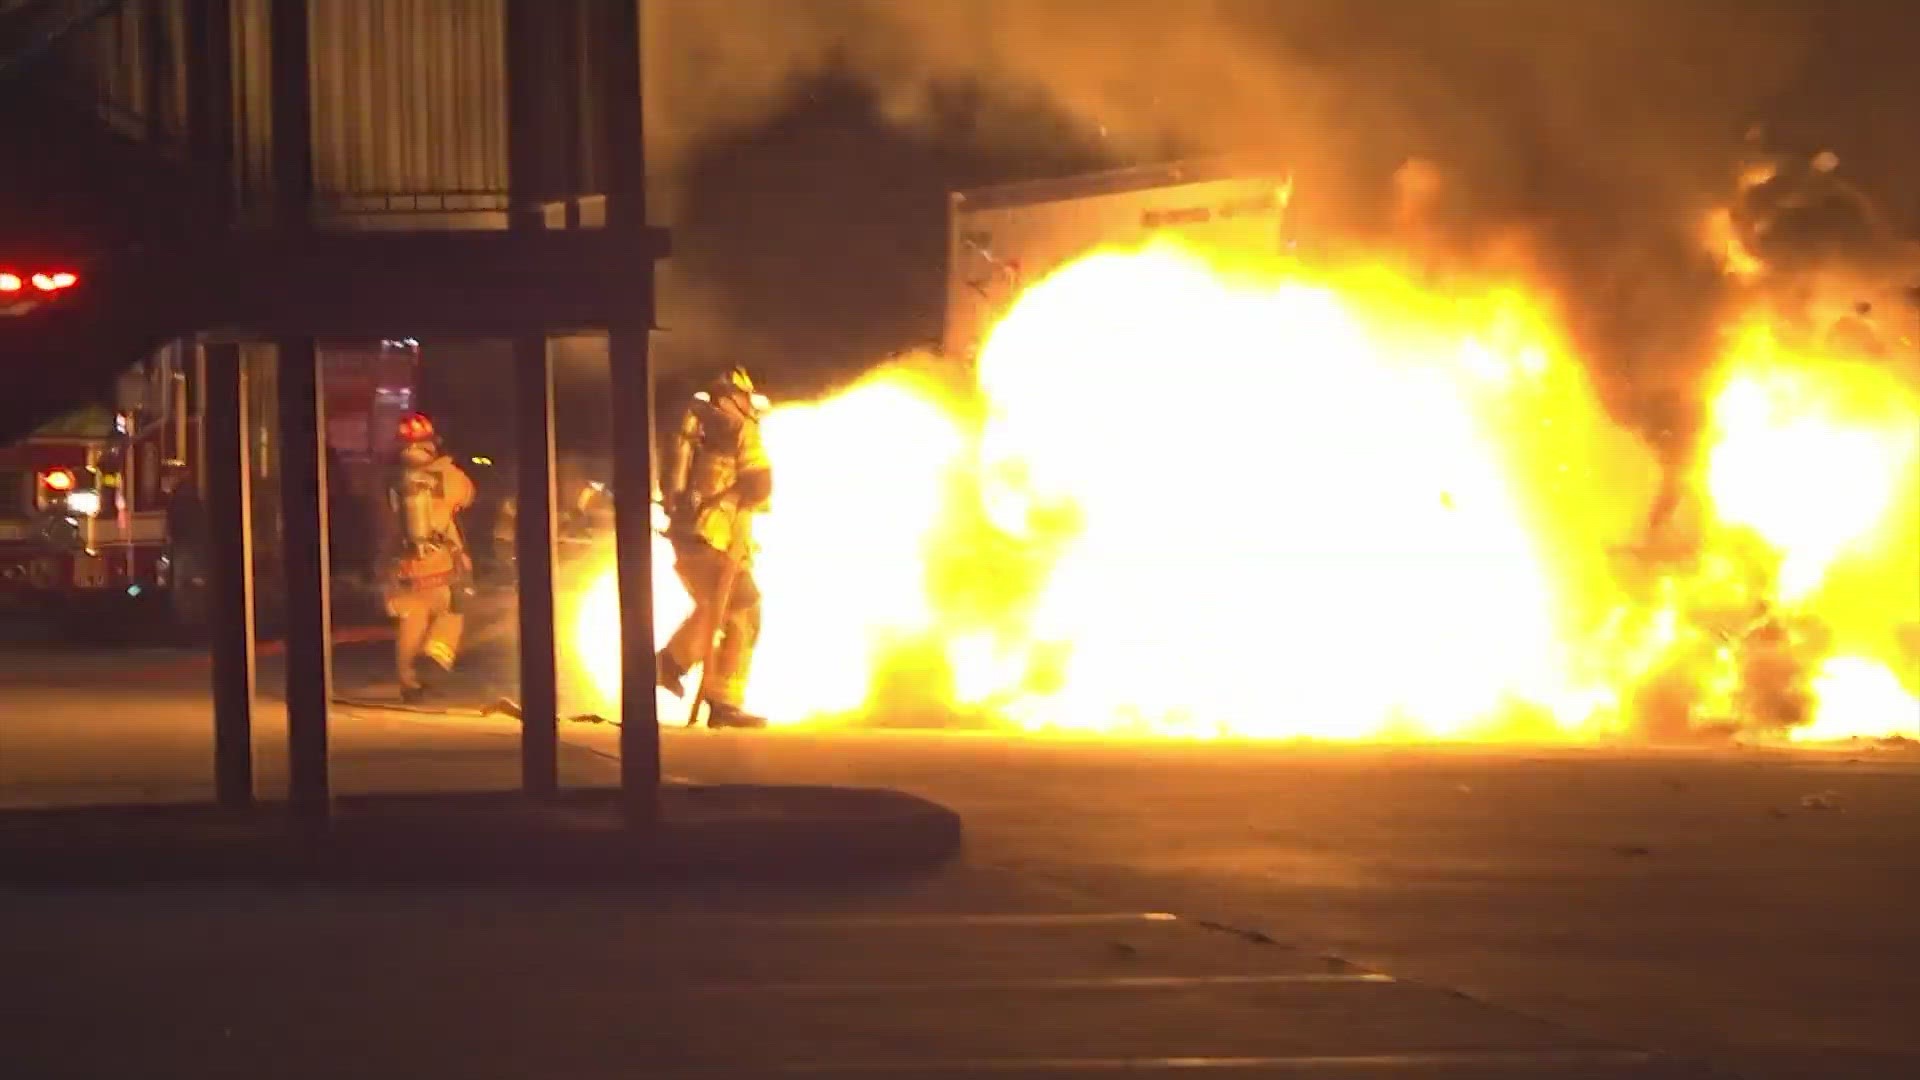 Firefighters were responding to the truck fire at a shopping center near the West Loop.